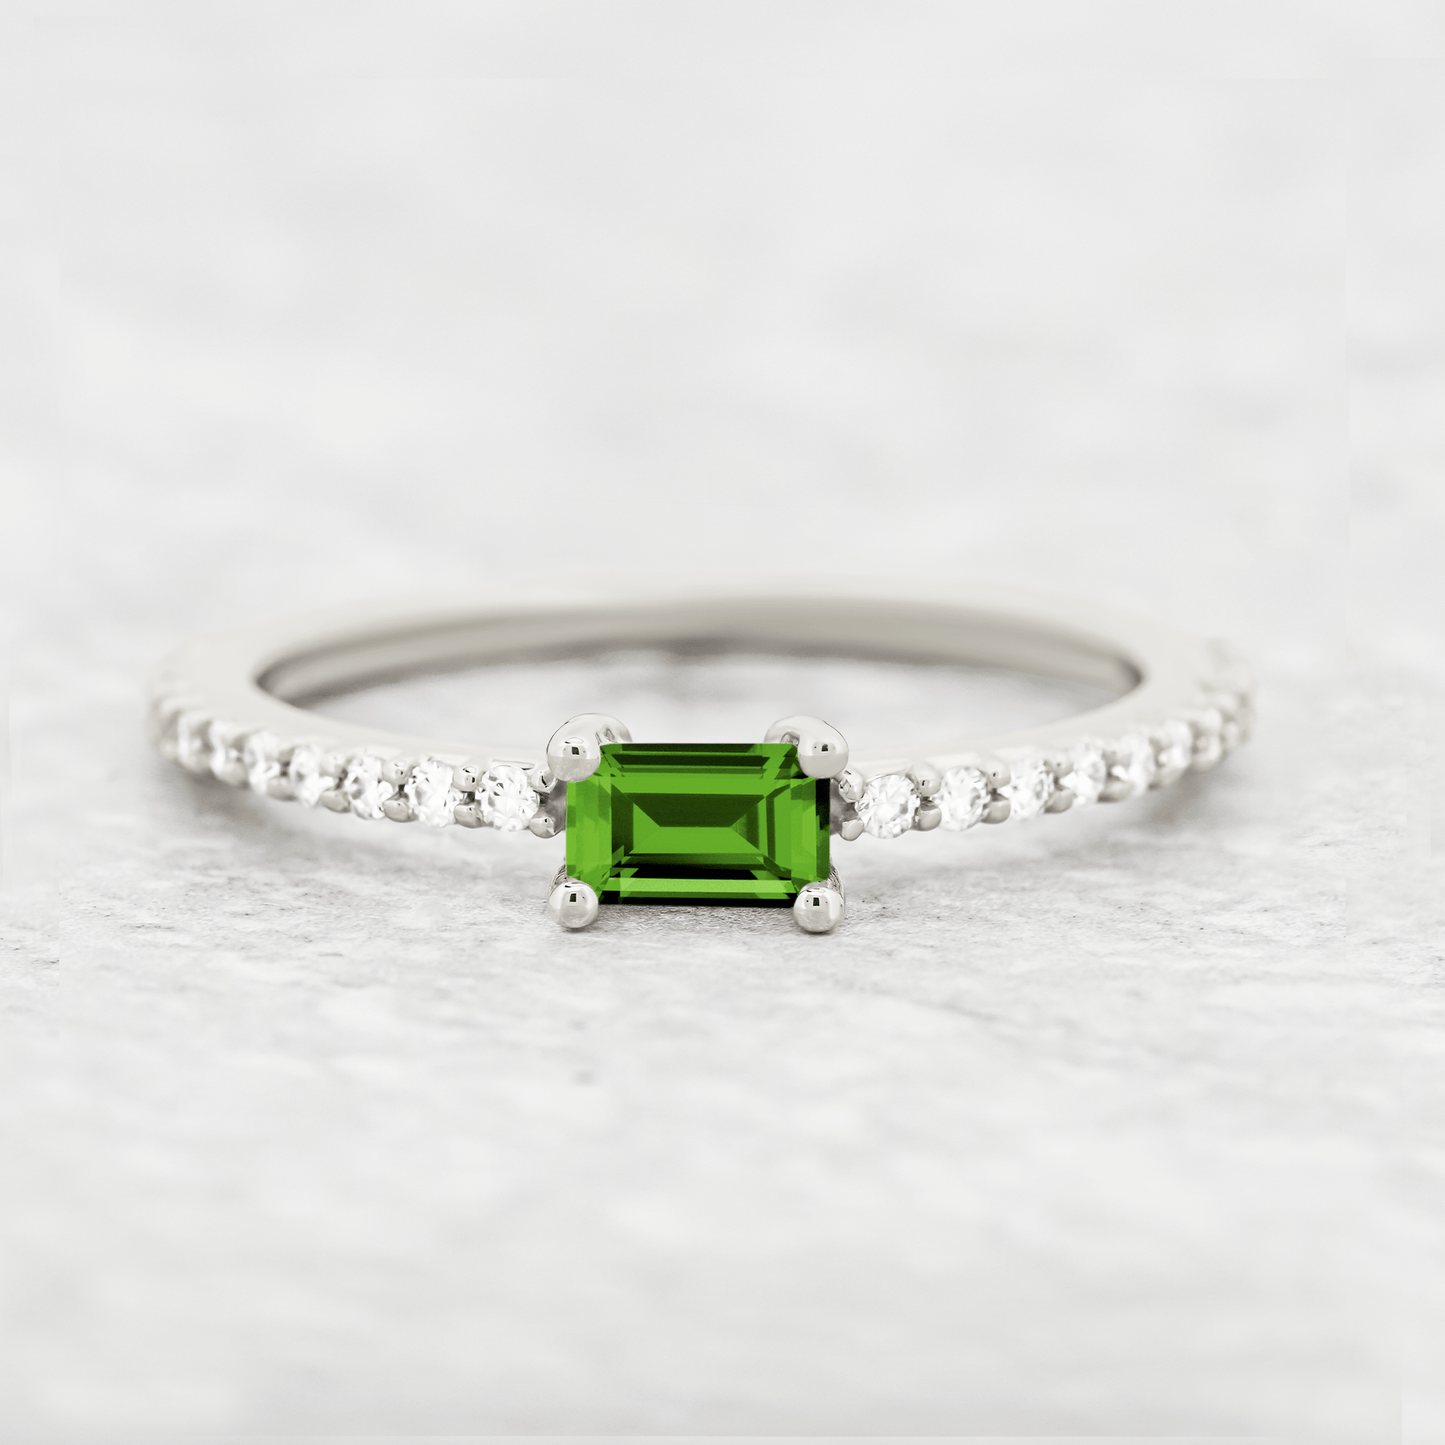 The Chloe - Emerald - Men's Wedding Rings - Manly Bands